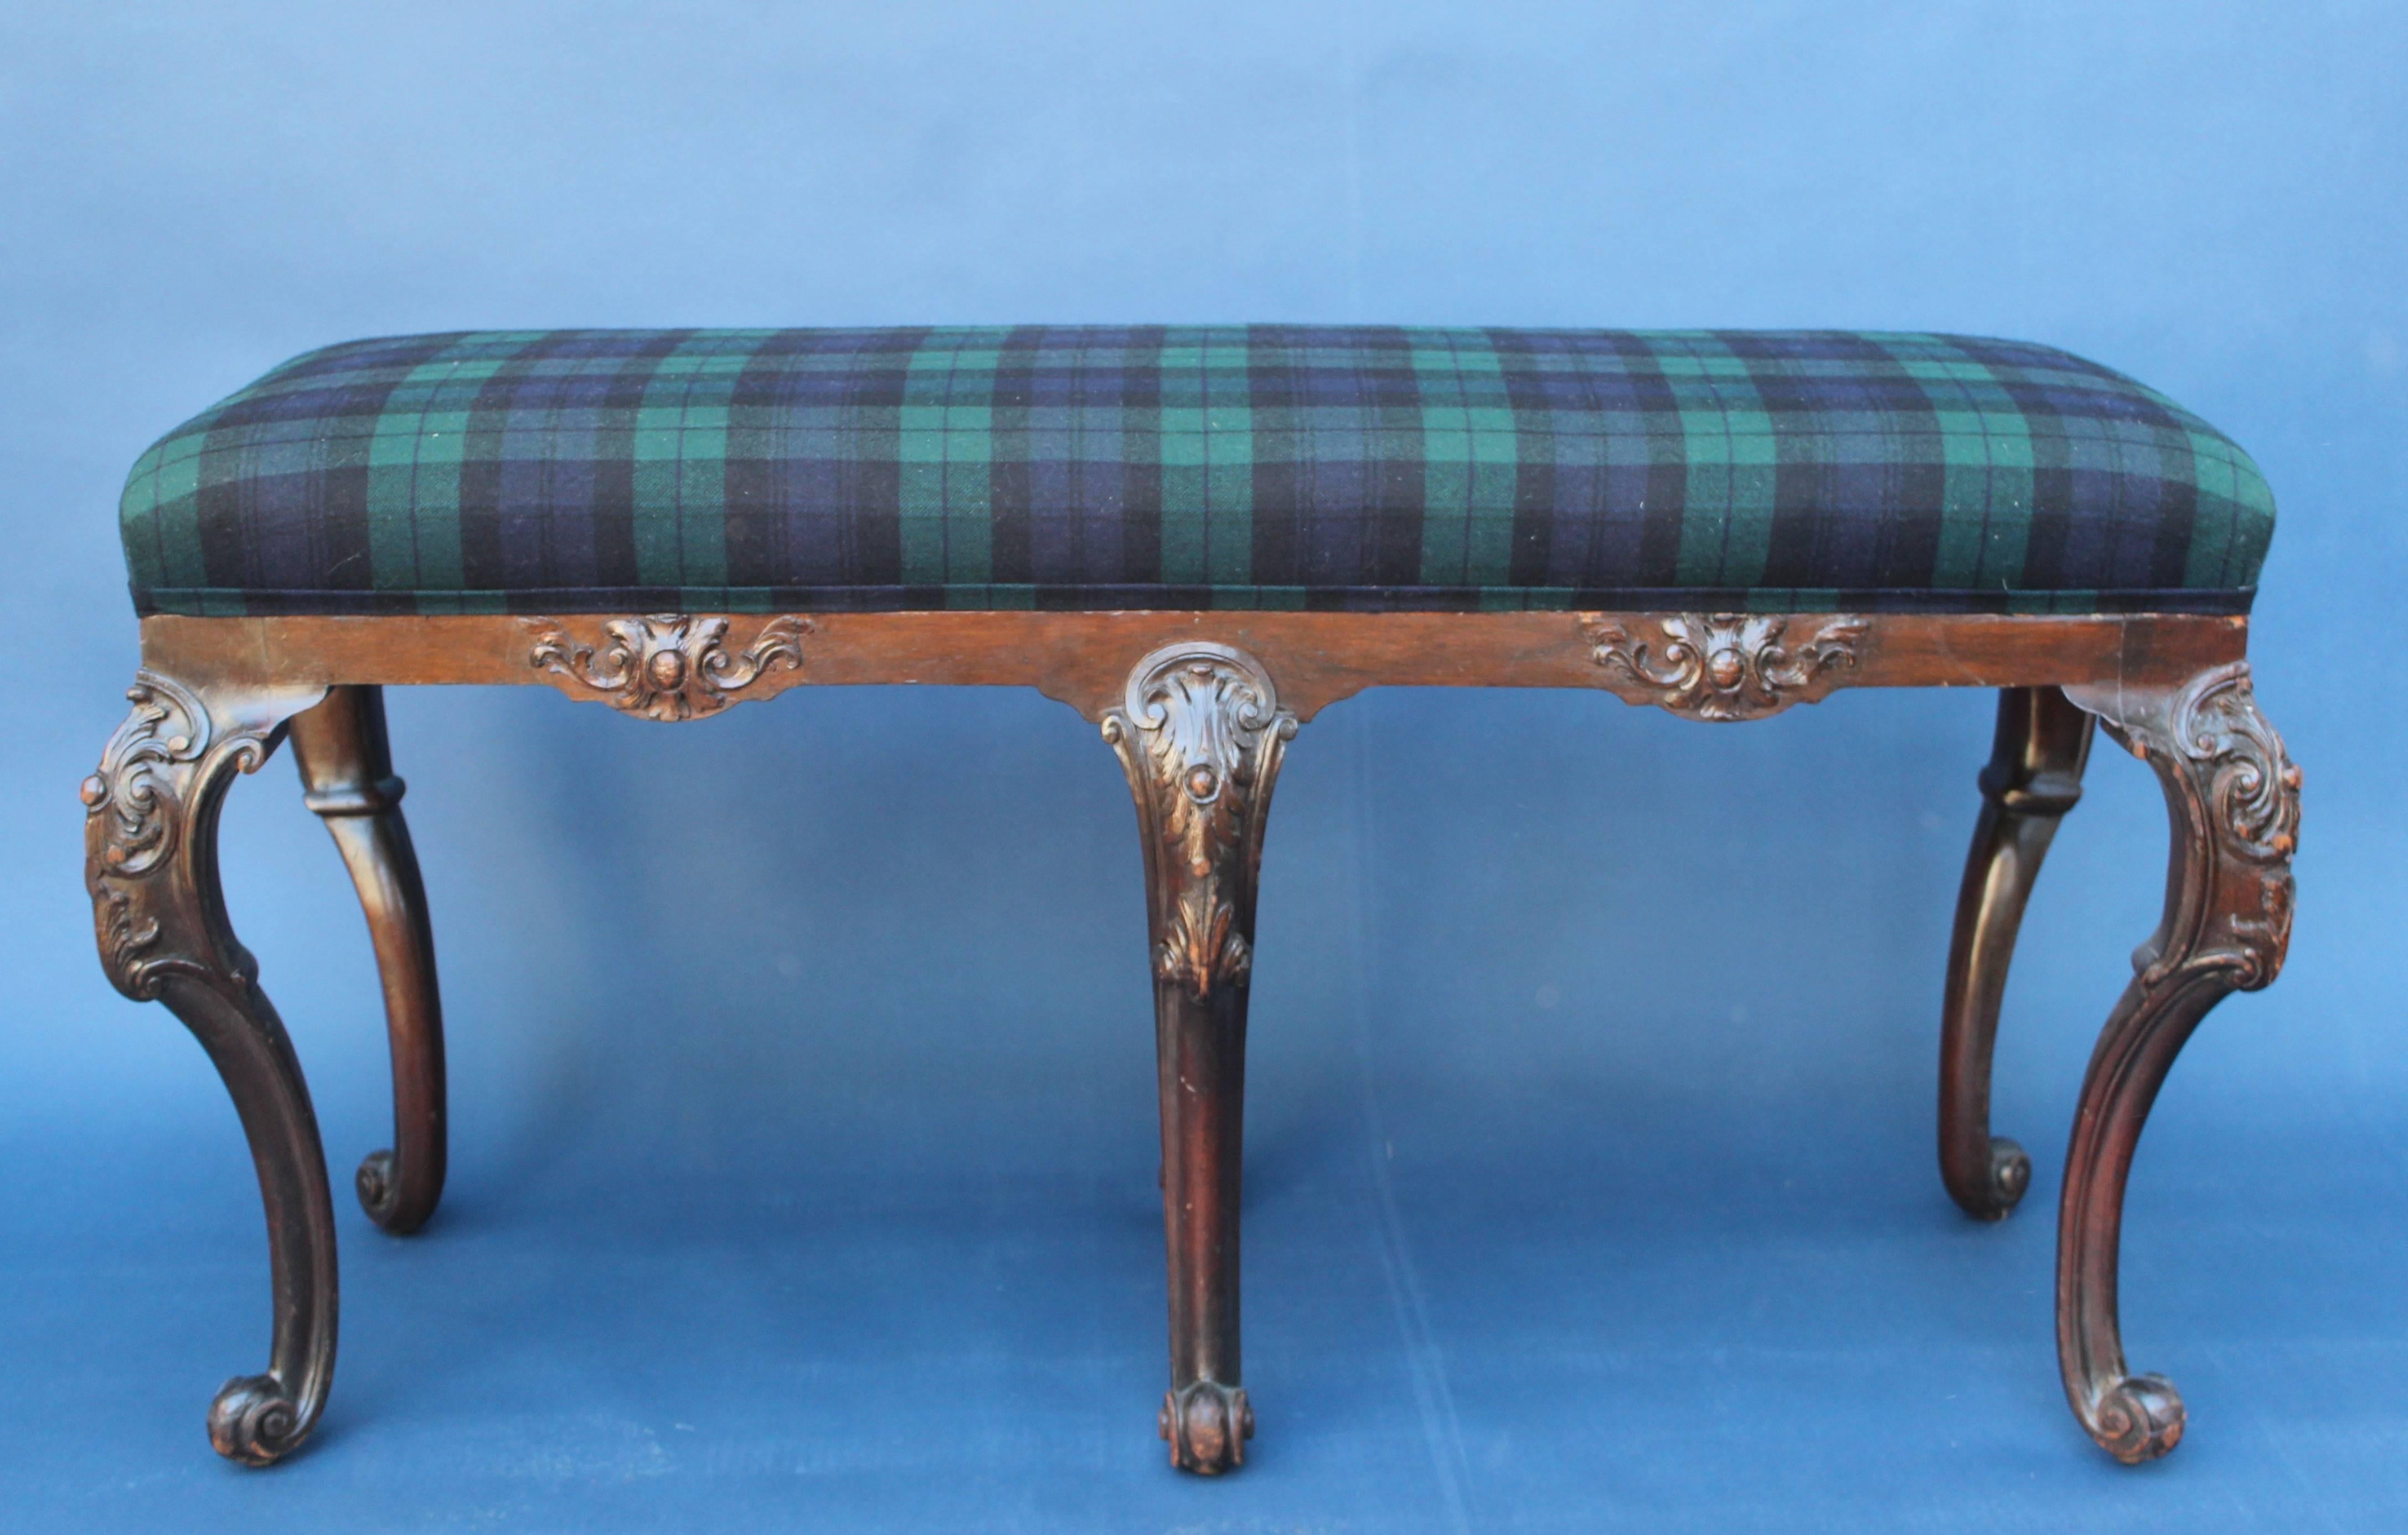 Handsome George III style bench upholstered in black watch plaid wool six legs.